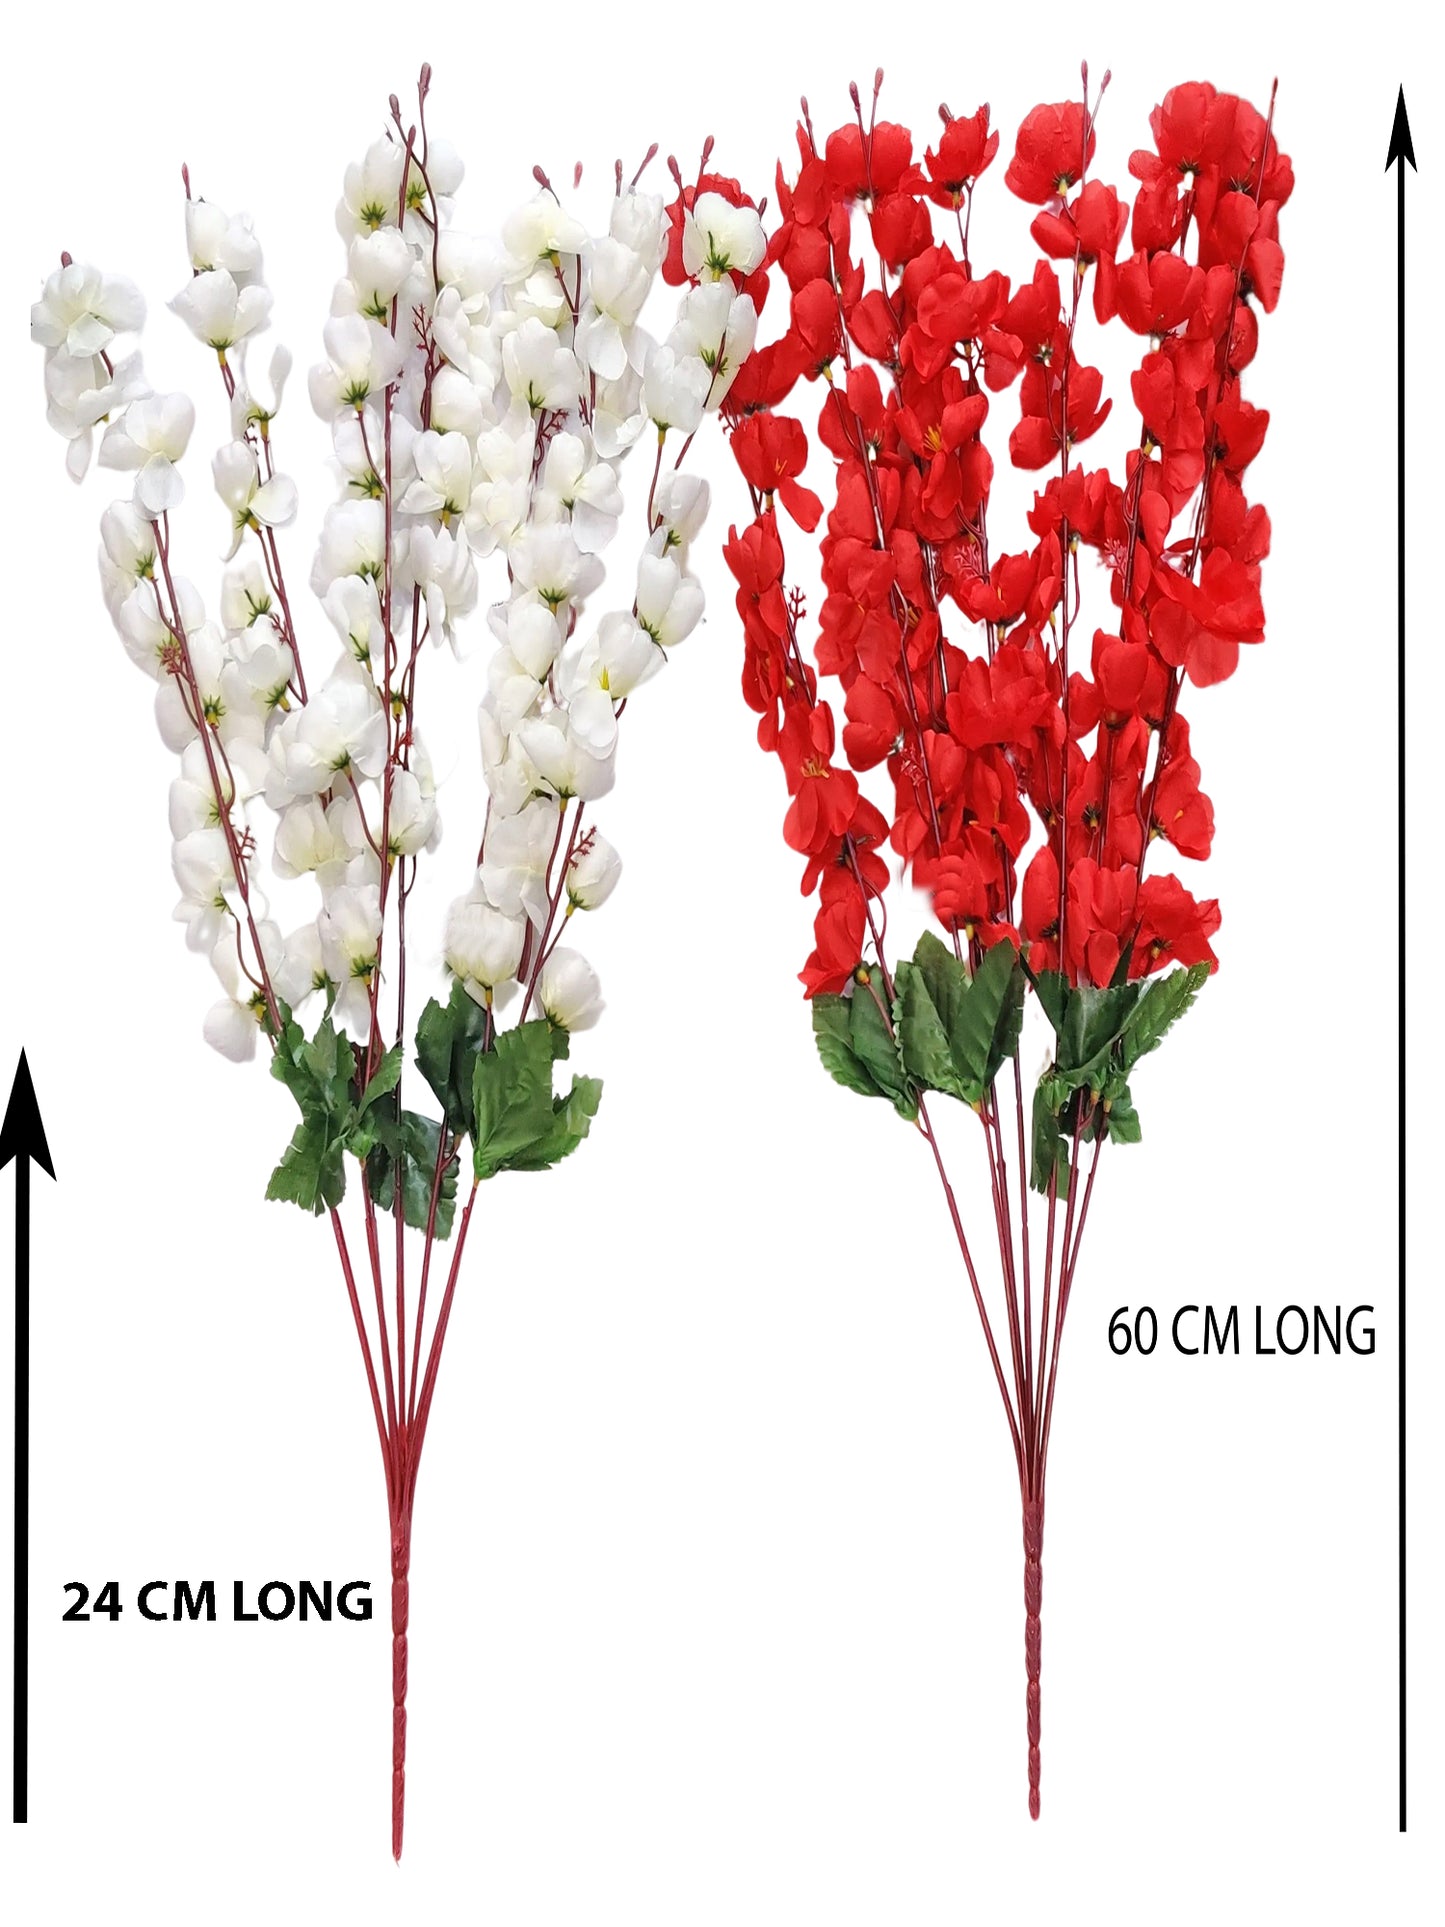 ARTSY® Artificial Flowers For Home Decoration Cherry Blossom Flower Bunch For Vase Office Decor | Without vase | Combo (White Red, Pack of 2 pieces)